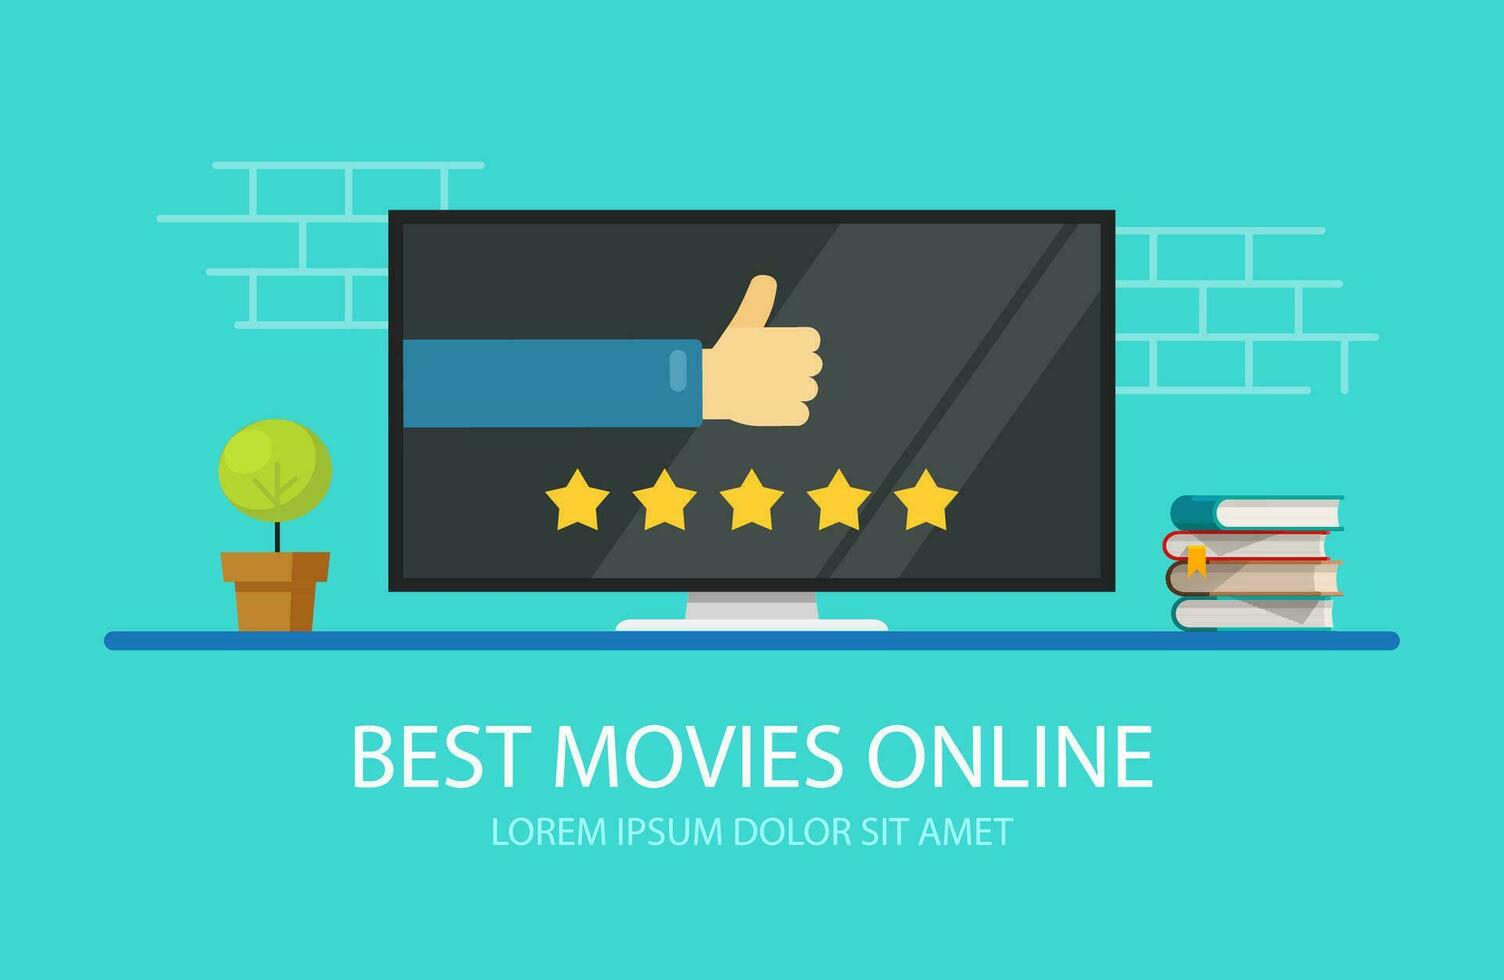 Online cinema review on tv or movie feedback experience rating vector illustration flat cartoon, concept of television film rate or evaluation technology, quality survey or ranking image